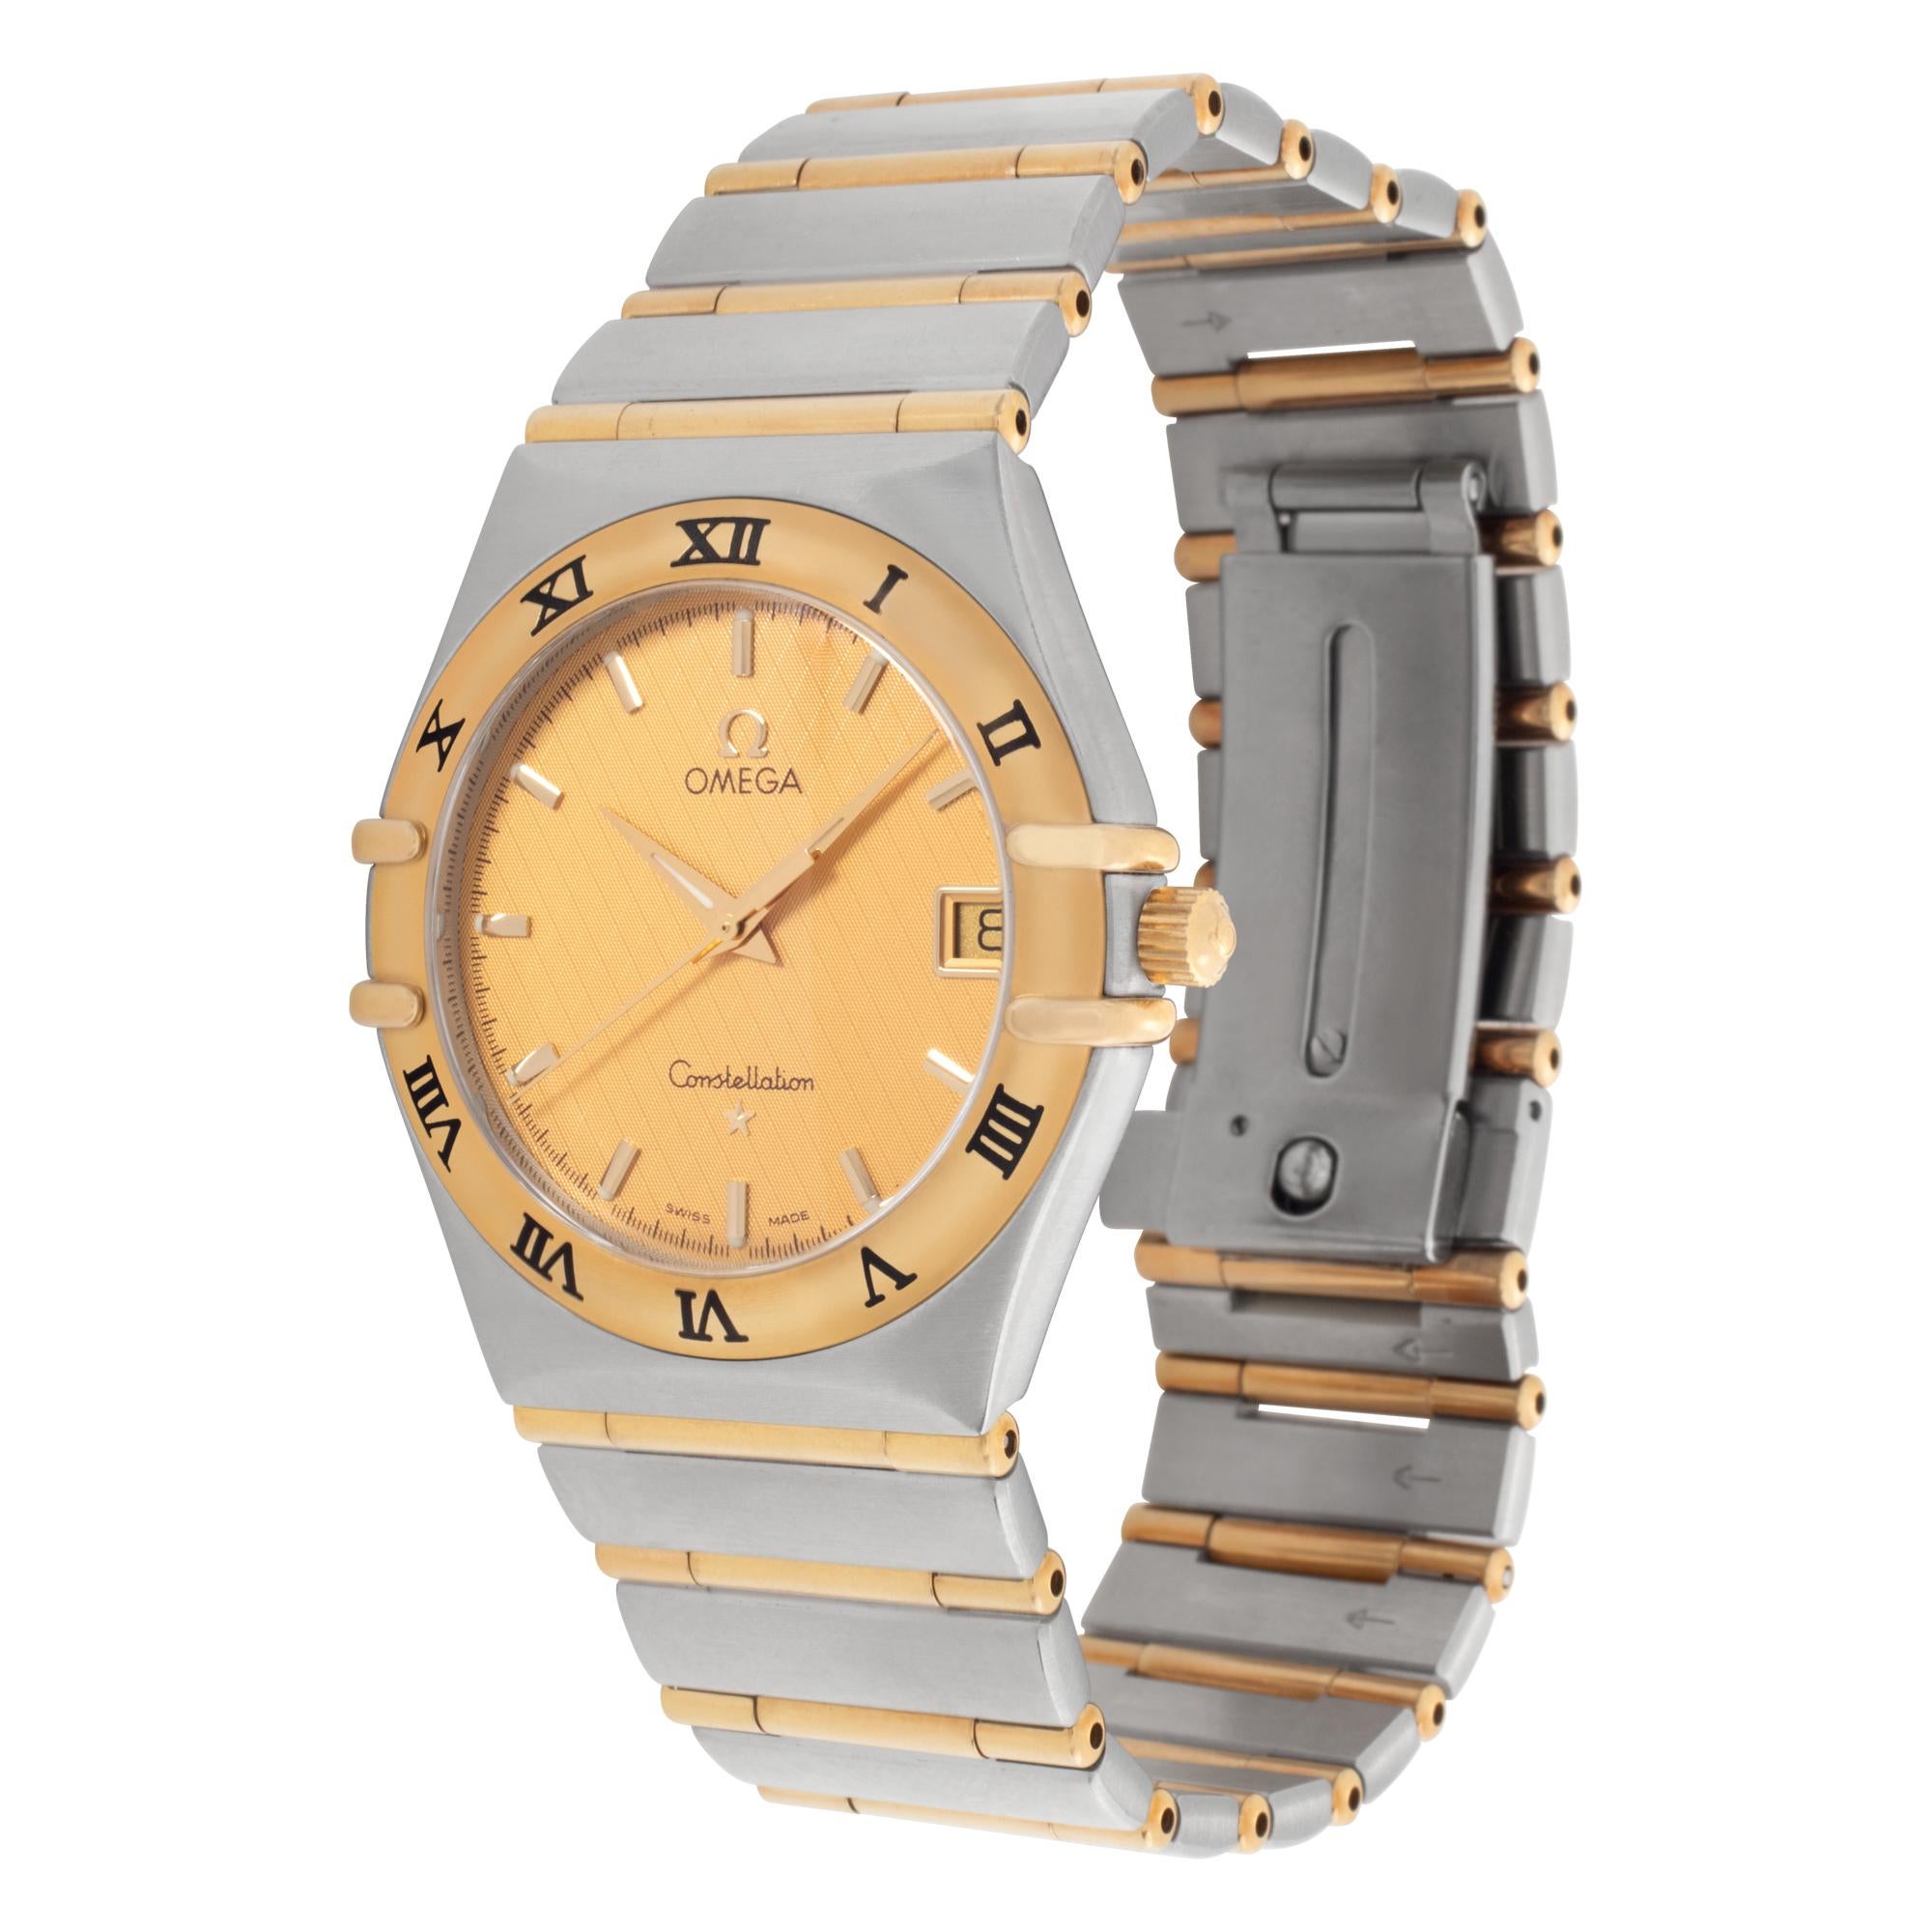 Omega Constellation in stainless steel and 18k yellow gold.  Quartz w/ sweep seconds and date. 33 mm case size. Ref 1212.30.00. Circa 1990s. Fine Pre-owned Omega Watch. Certified preowned Classic Omega Constellation 1212.30.00 watch is made out of